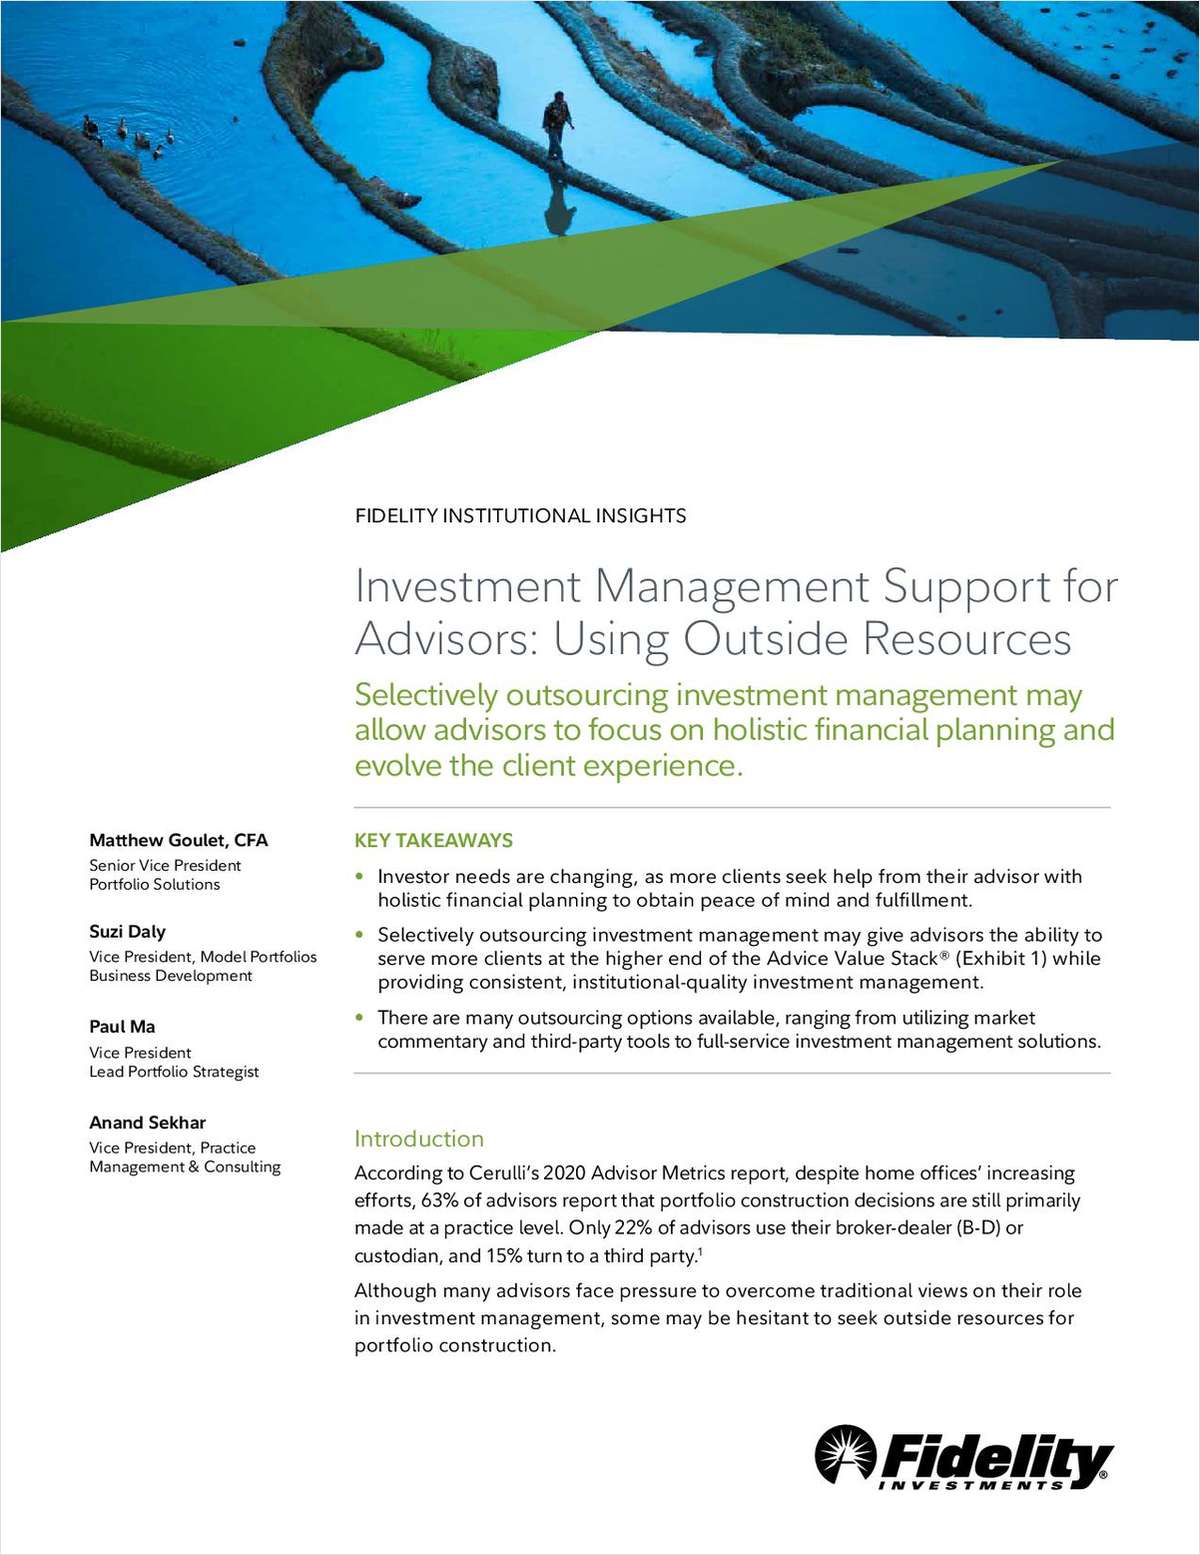 Investment Management Support for Advisors: Using Outside Resources